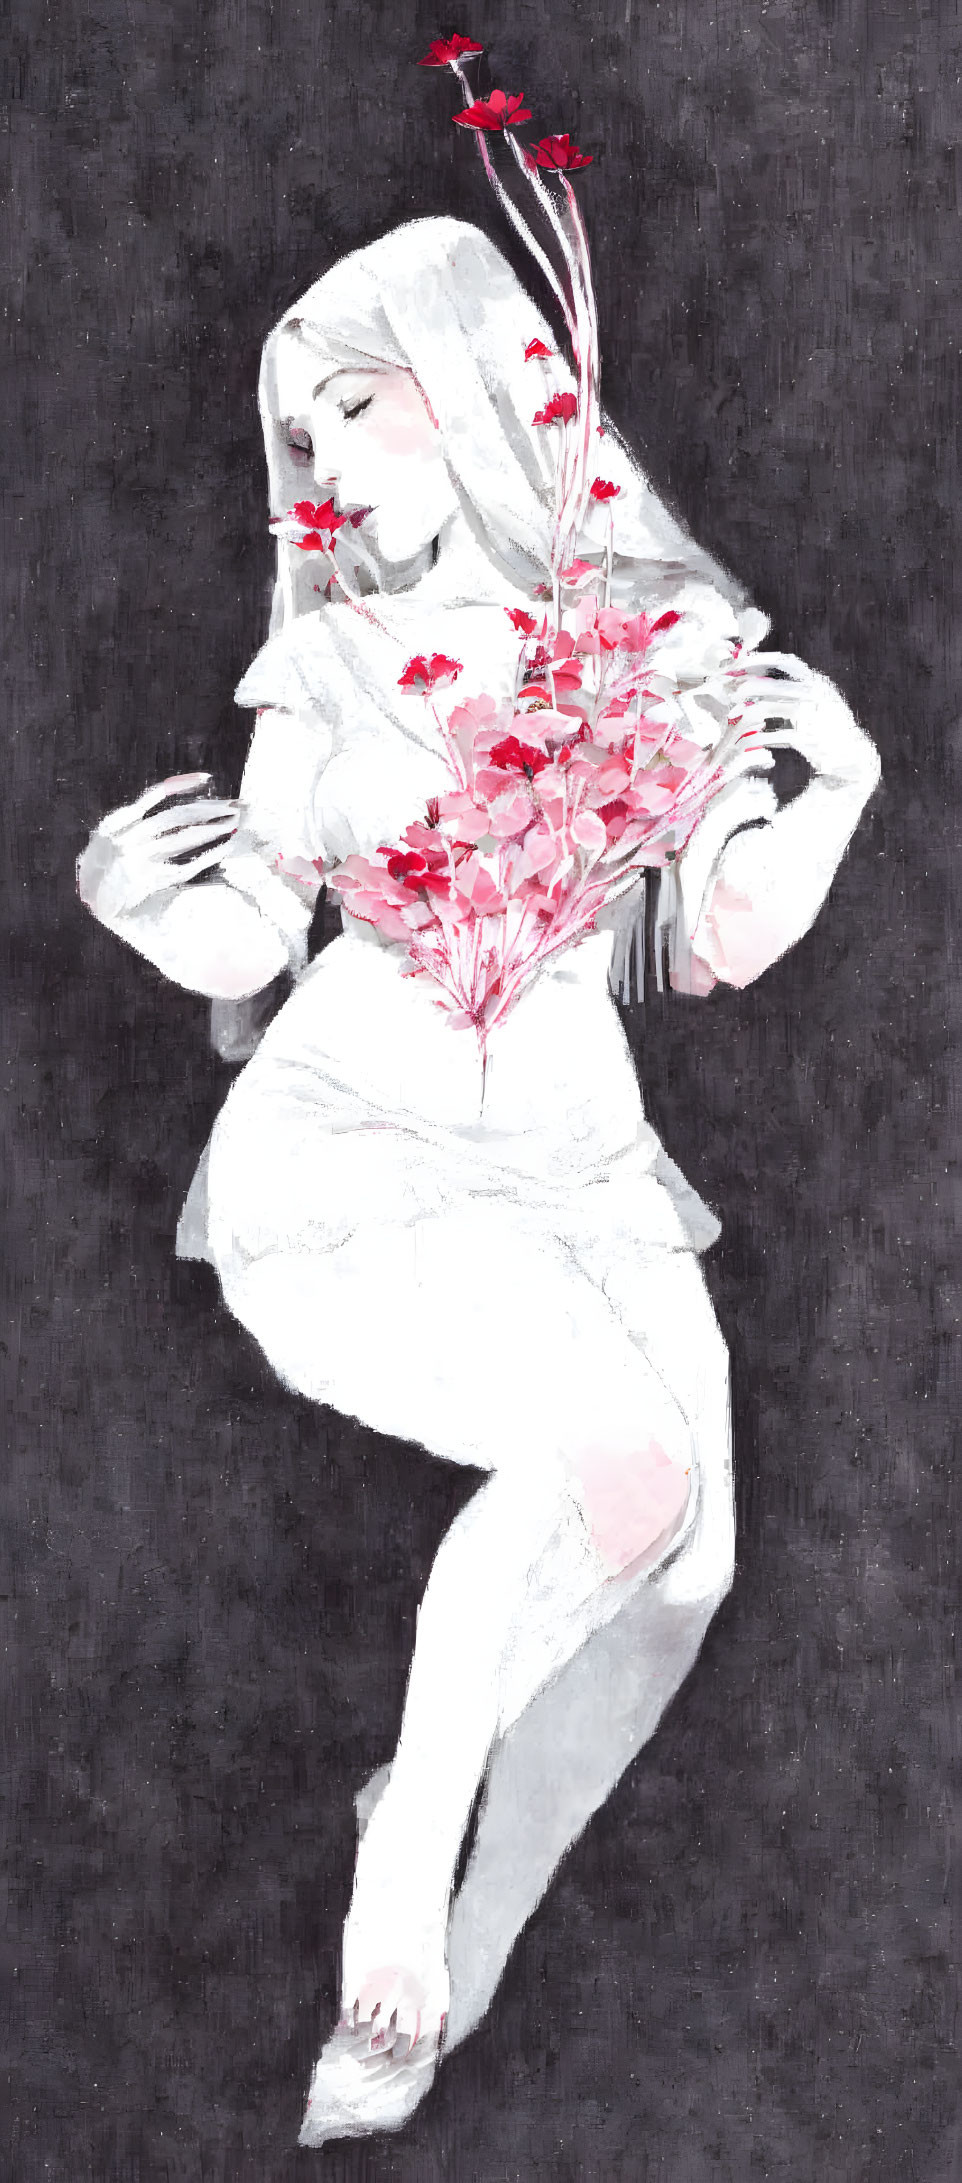 Portrait of a person with white hair and dress holding red flowers on black background